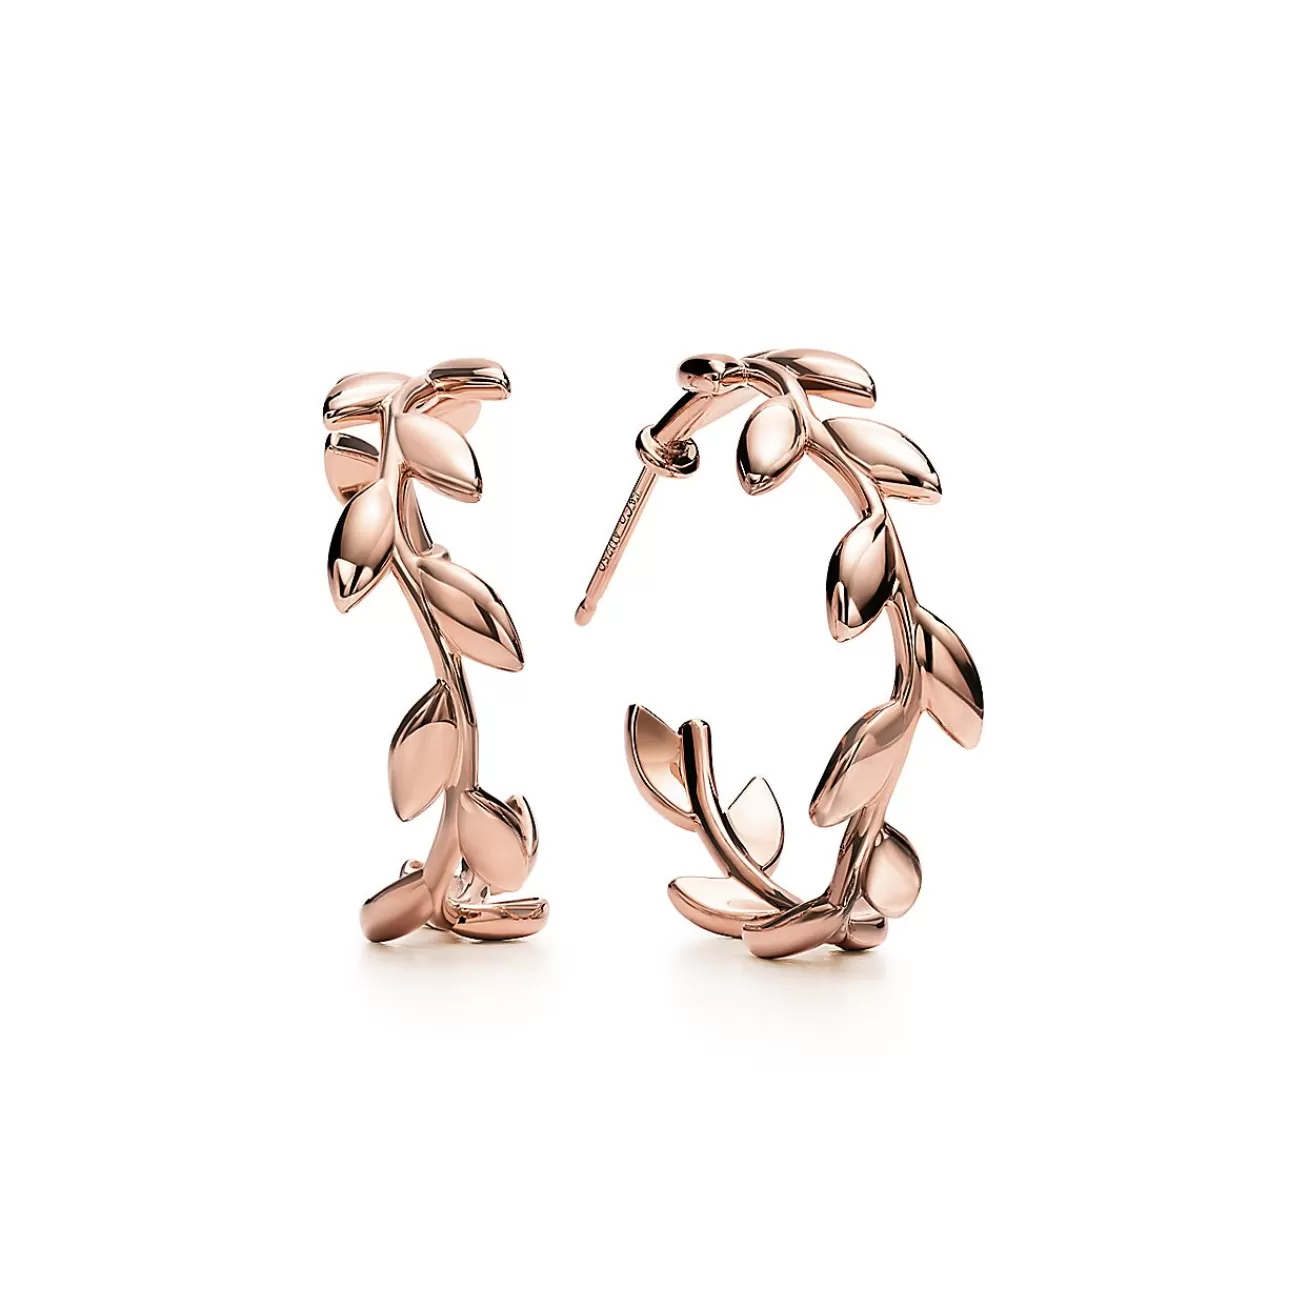 Tiffany & Co. Paloma Picasso® Olive Leaf hoop earrings in 18k rose gold. | ^ Earrings | Hoop Earrings